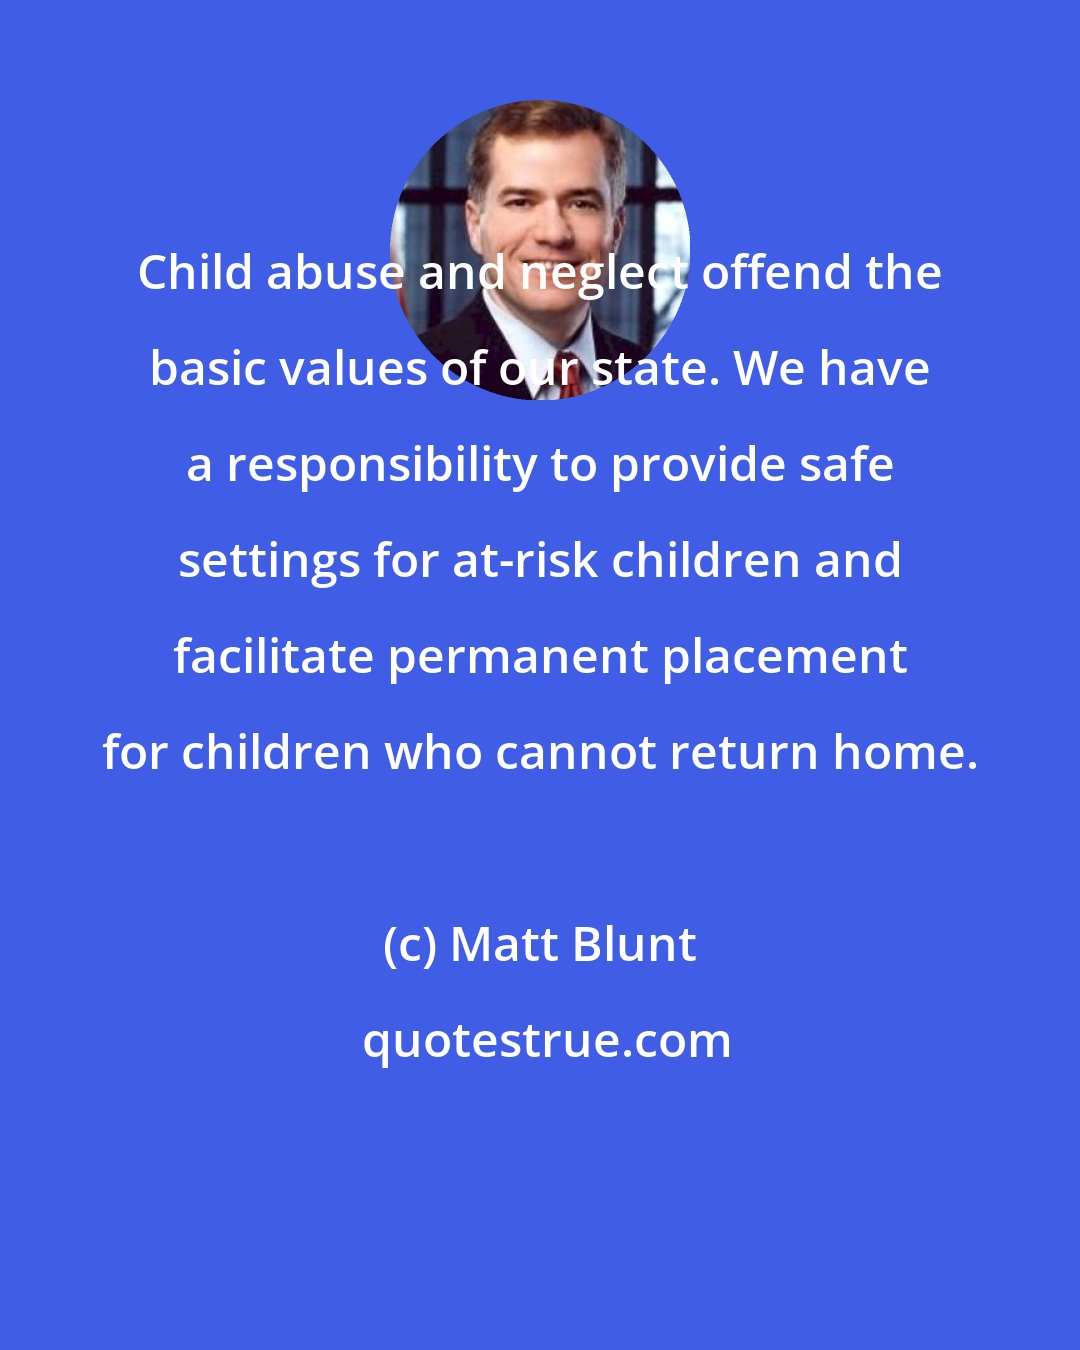 Matt Blunt: Child abuse and neglect offend the basic values of our state. We have a responsibility to provide safe settings for at-risk children and facilitate permanent placement for children who cannot return home.